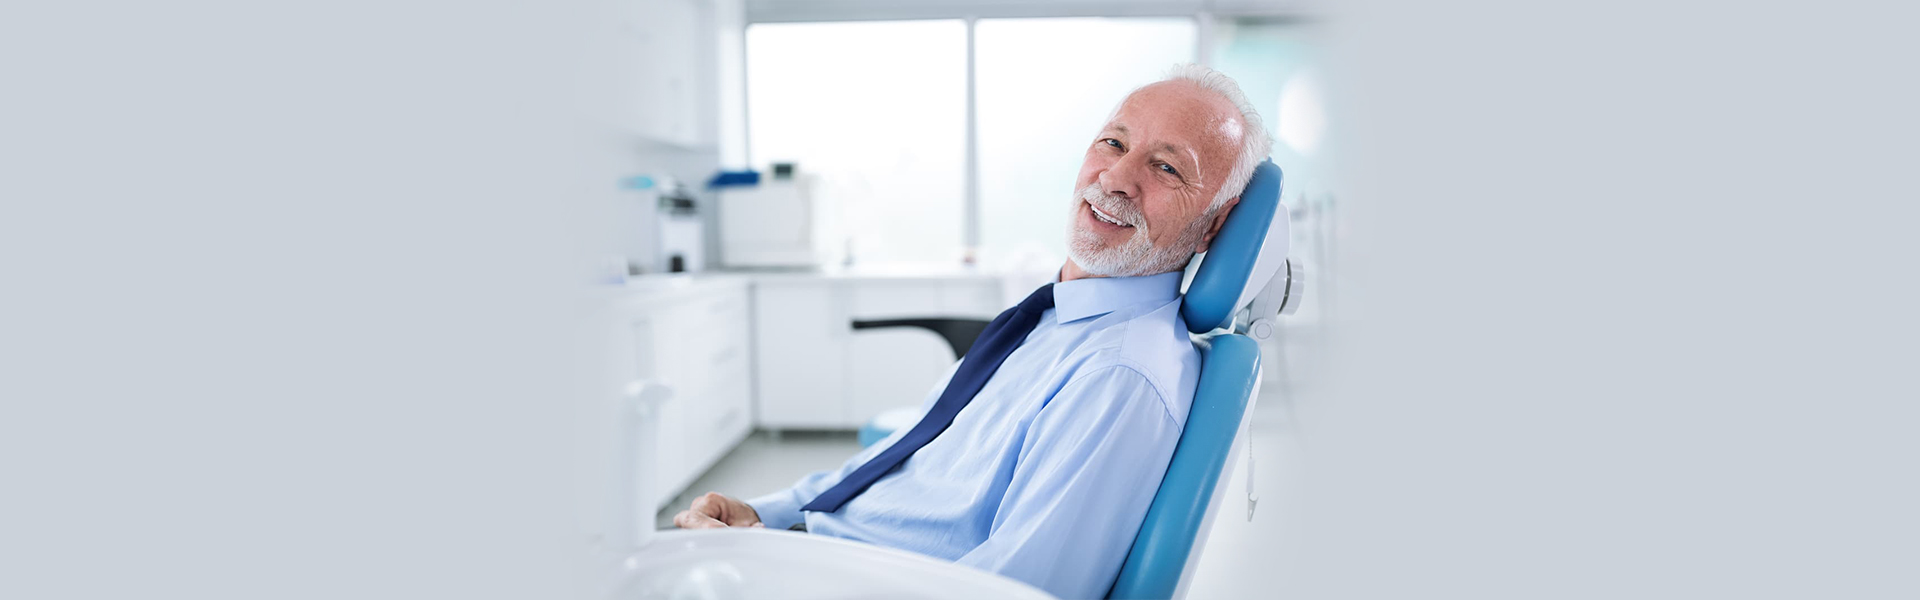 How Do You Know If You Need a Root Canal?